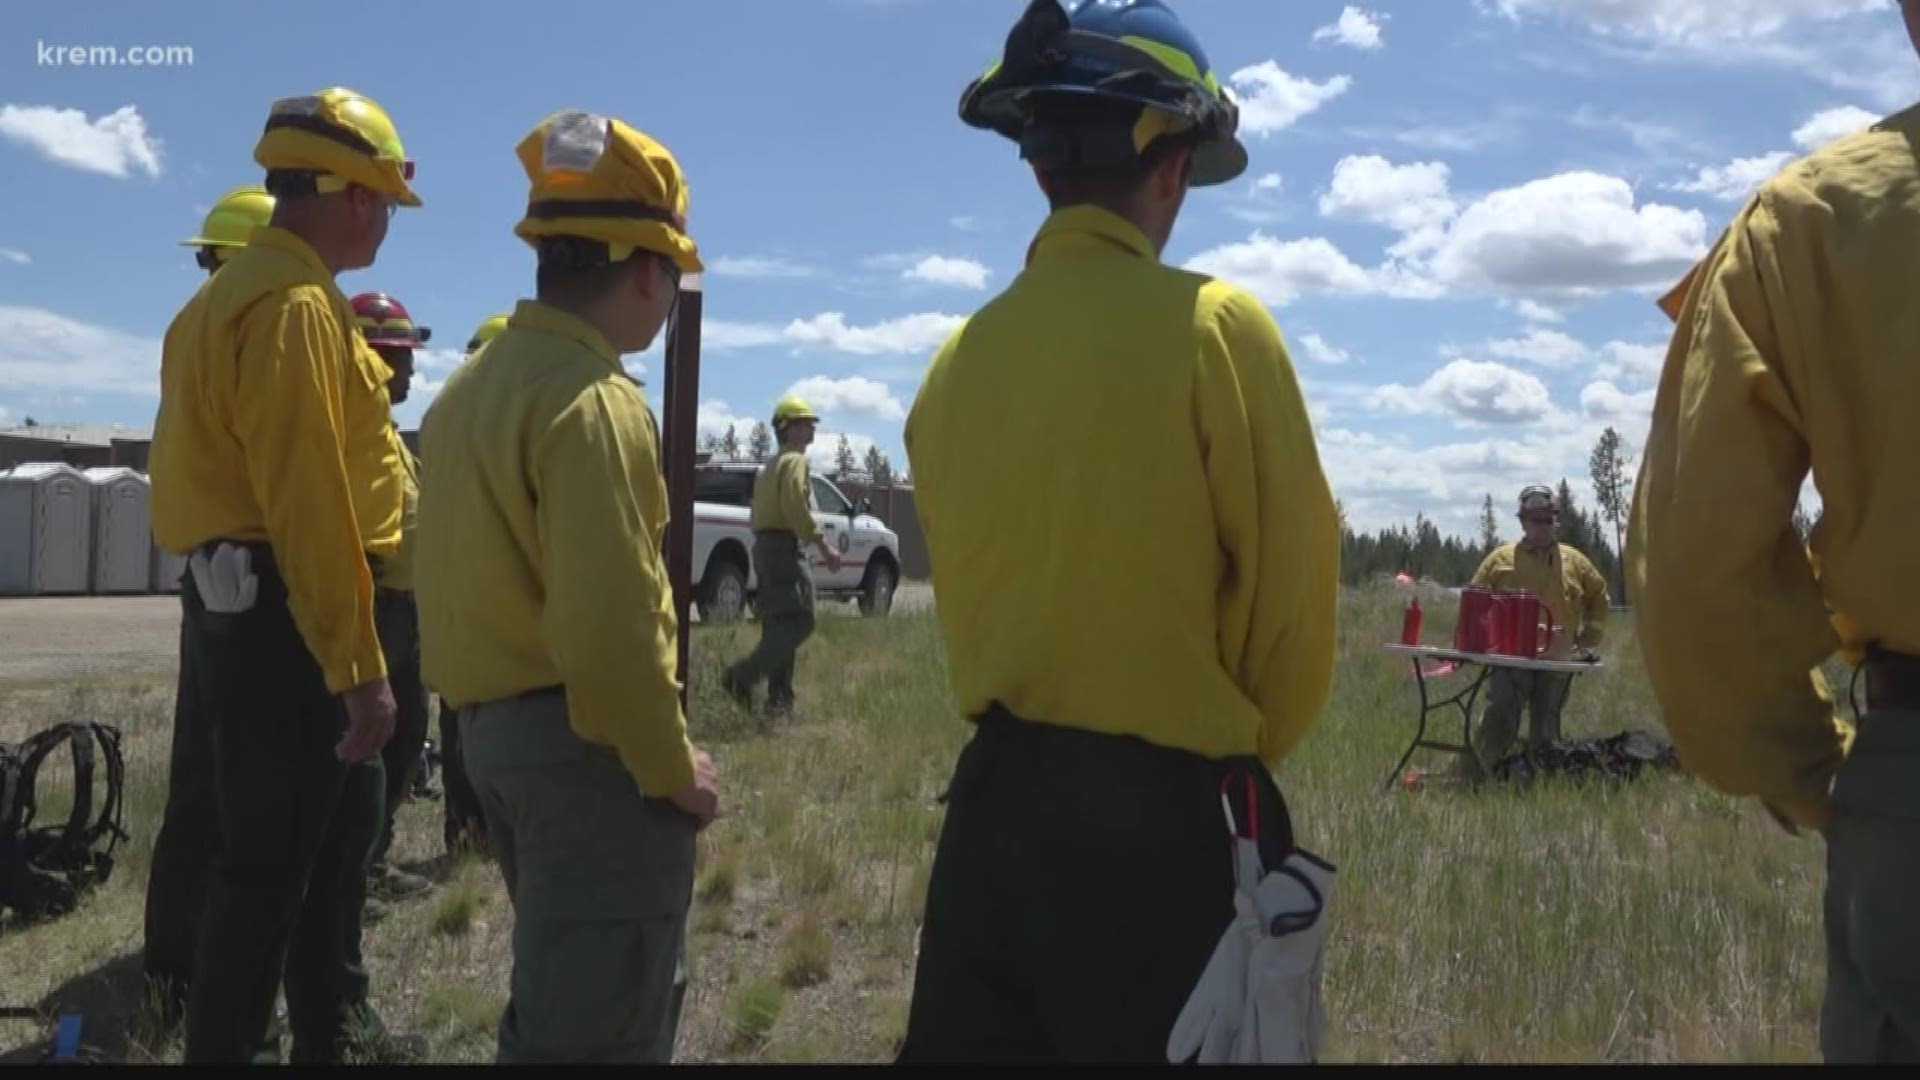 The training aimed at combating Washington wildfires will make any emergency fire situation run more safely and efficiently.